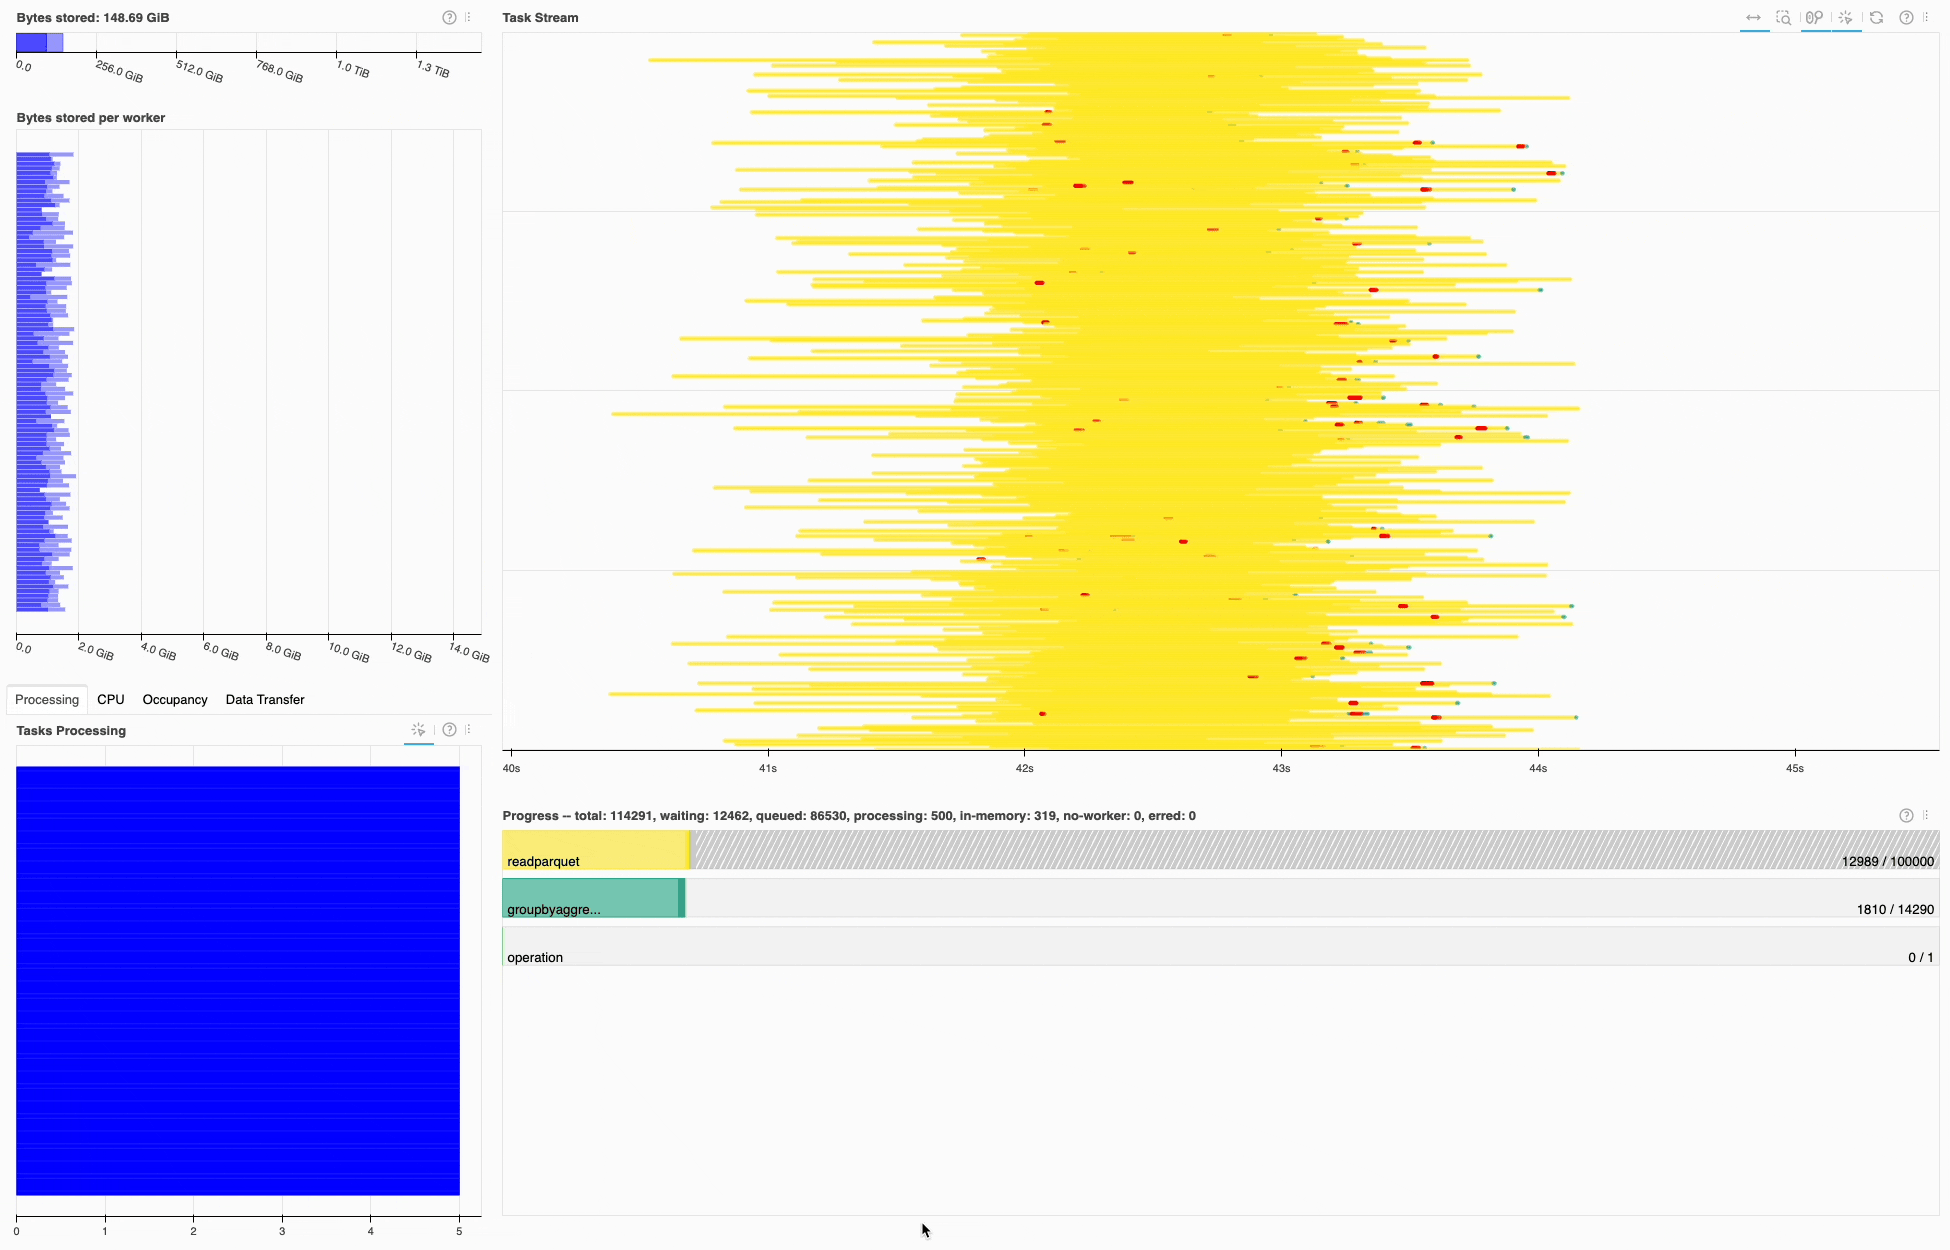 Screencast of the Dask dashboard running the 1TRC challenge. read_parquet shown in yellow, groupby-aggregation tasks shown in green.